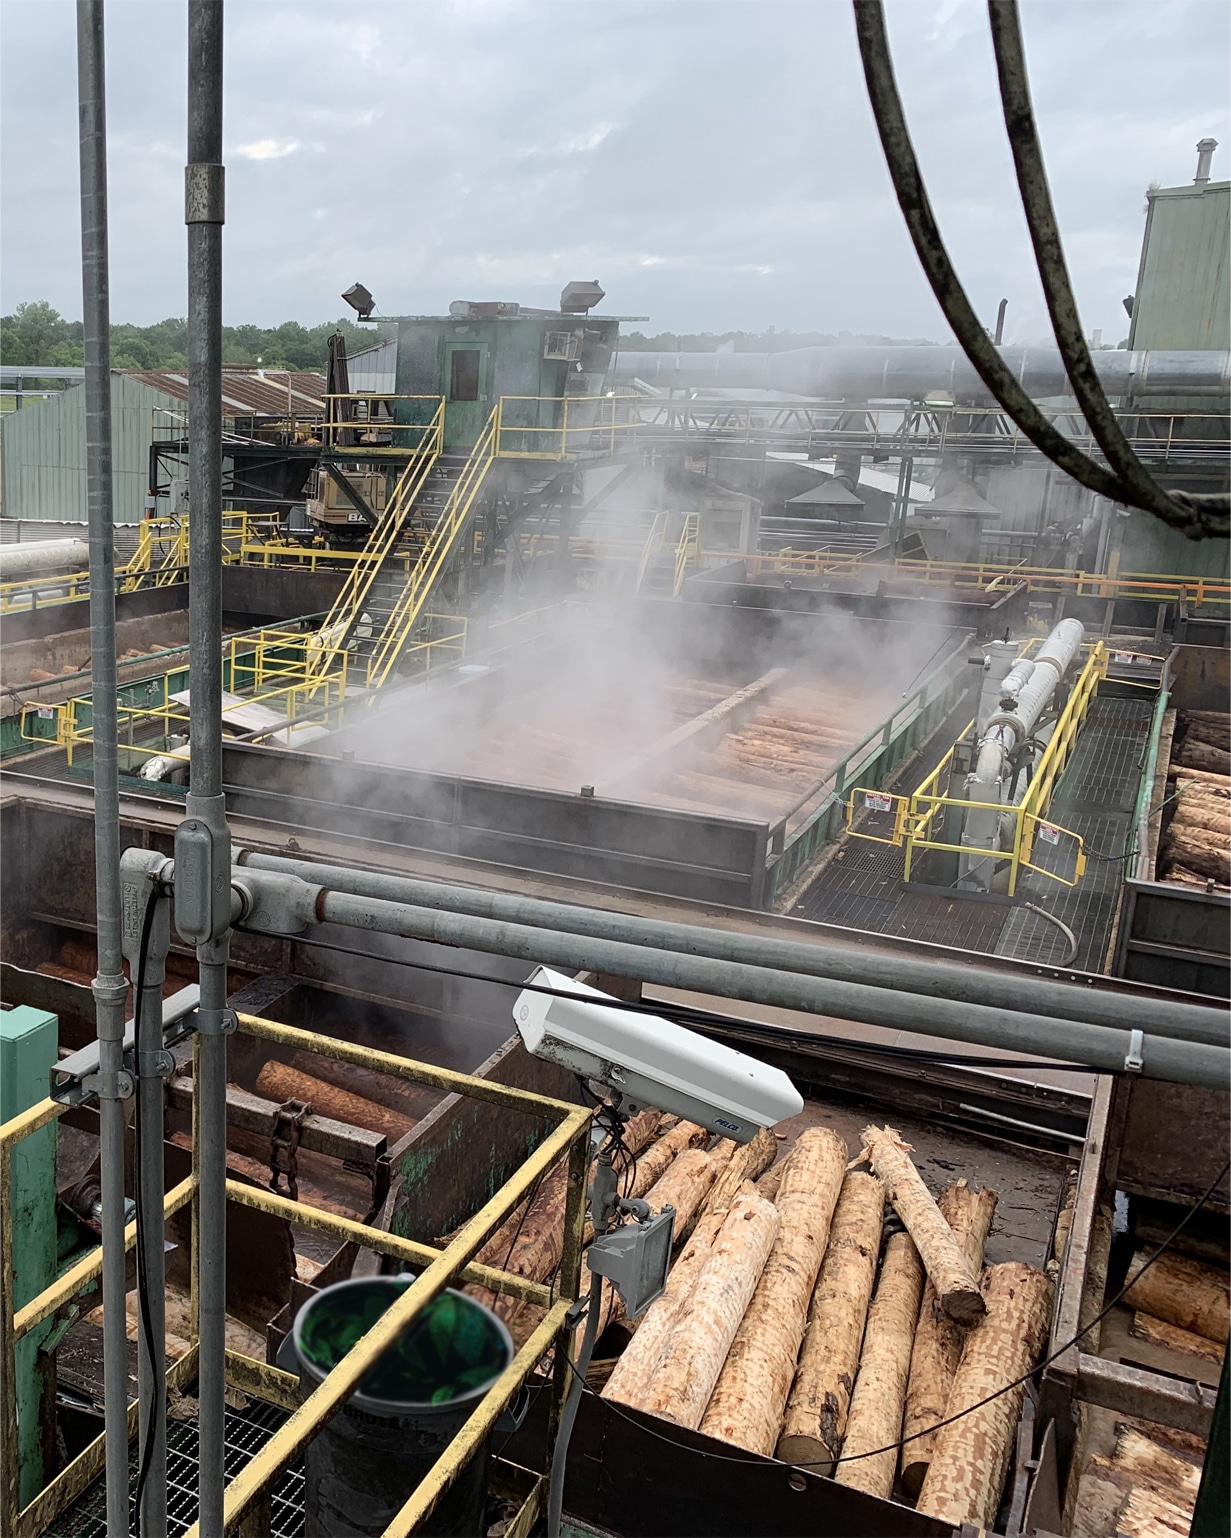 A photo of a lumber mill, with steam